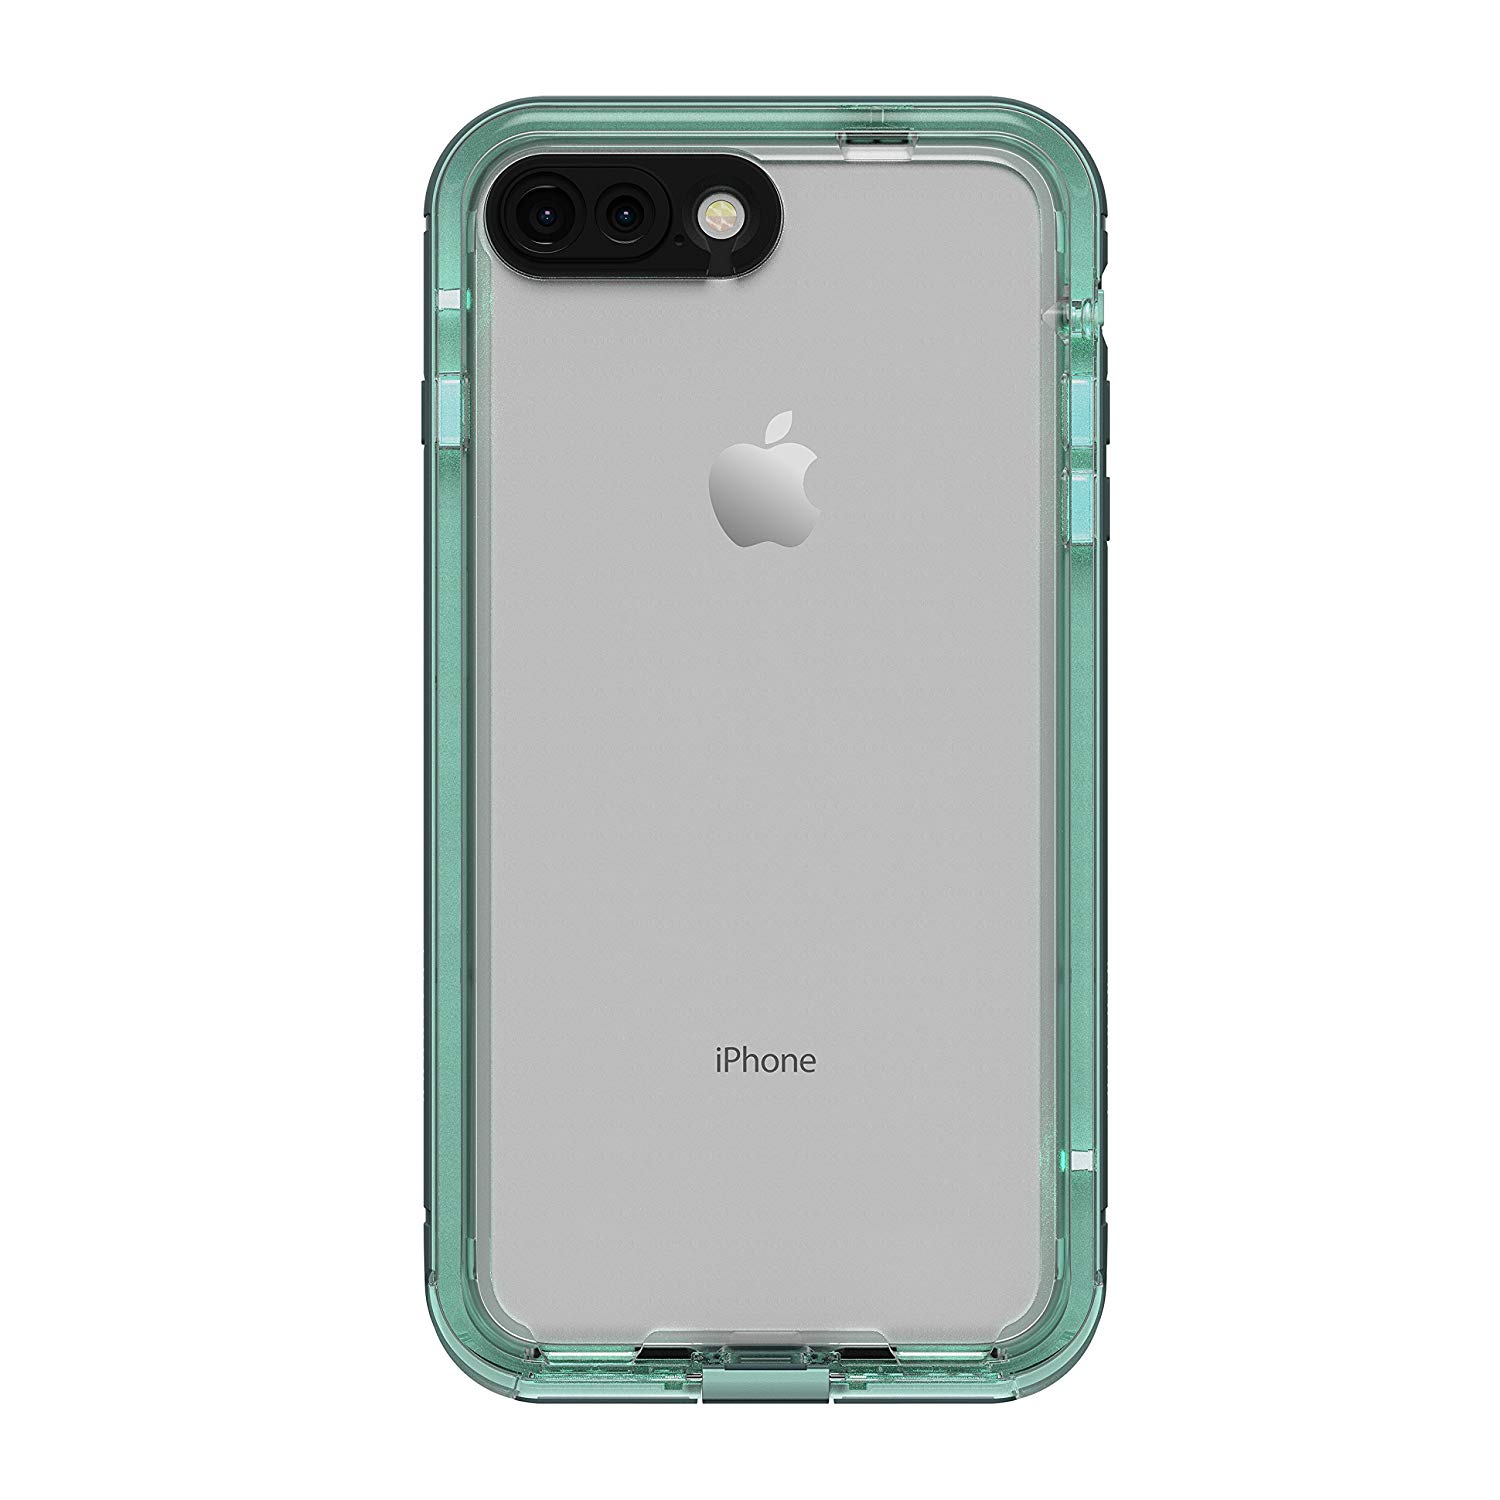 LifeProof NUUD Waterproof Case Drop Protection for iPhone 8 Plus ONLY